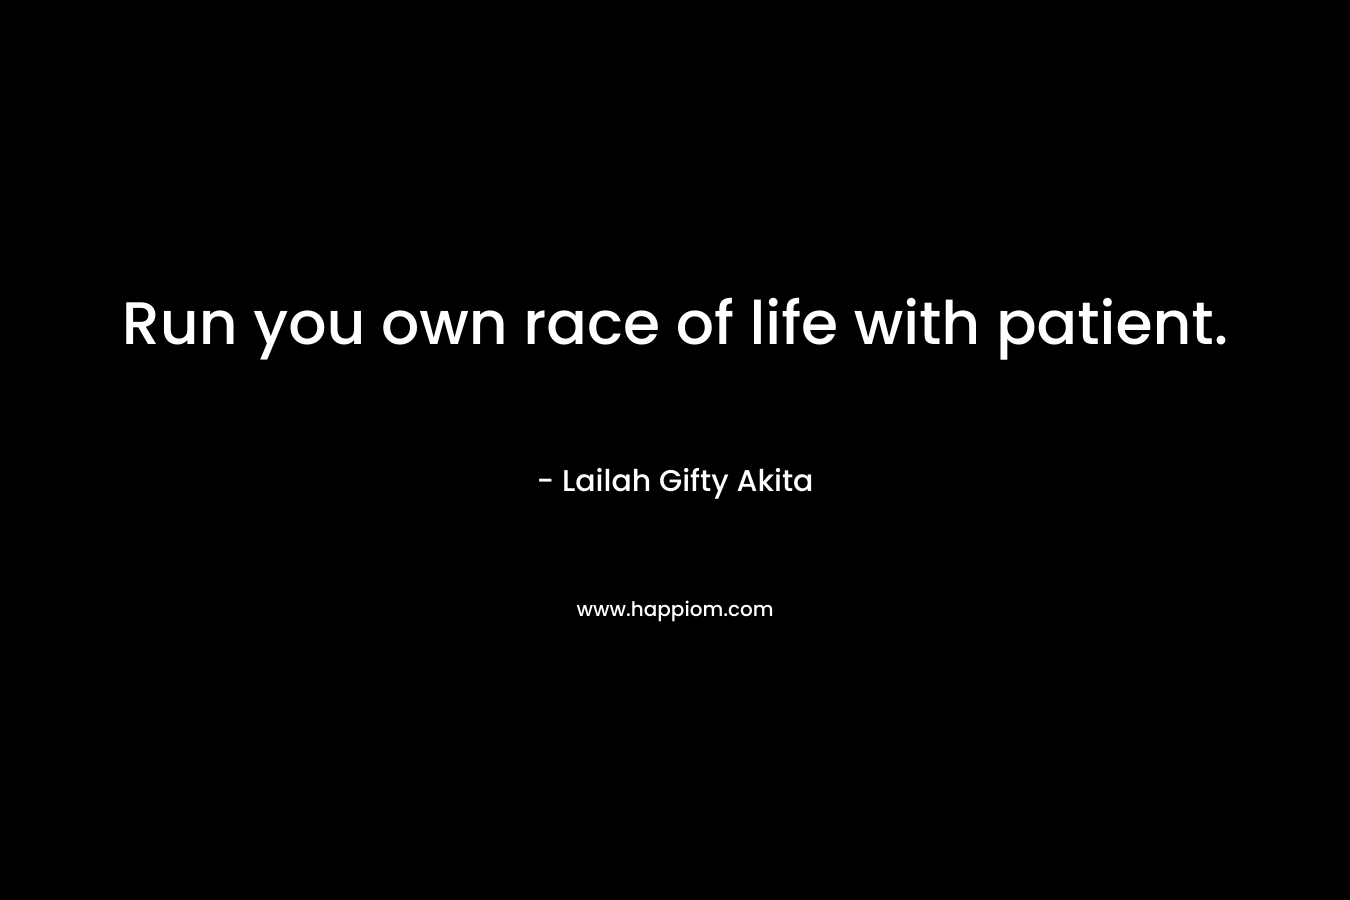 Run you own race of life with patient.